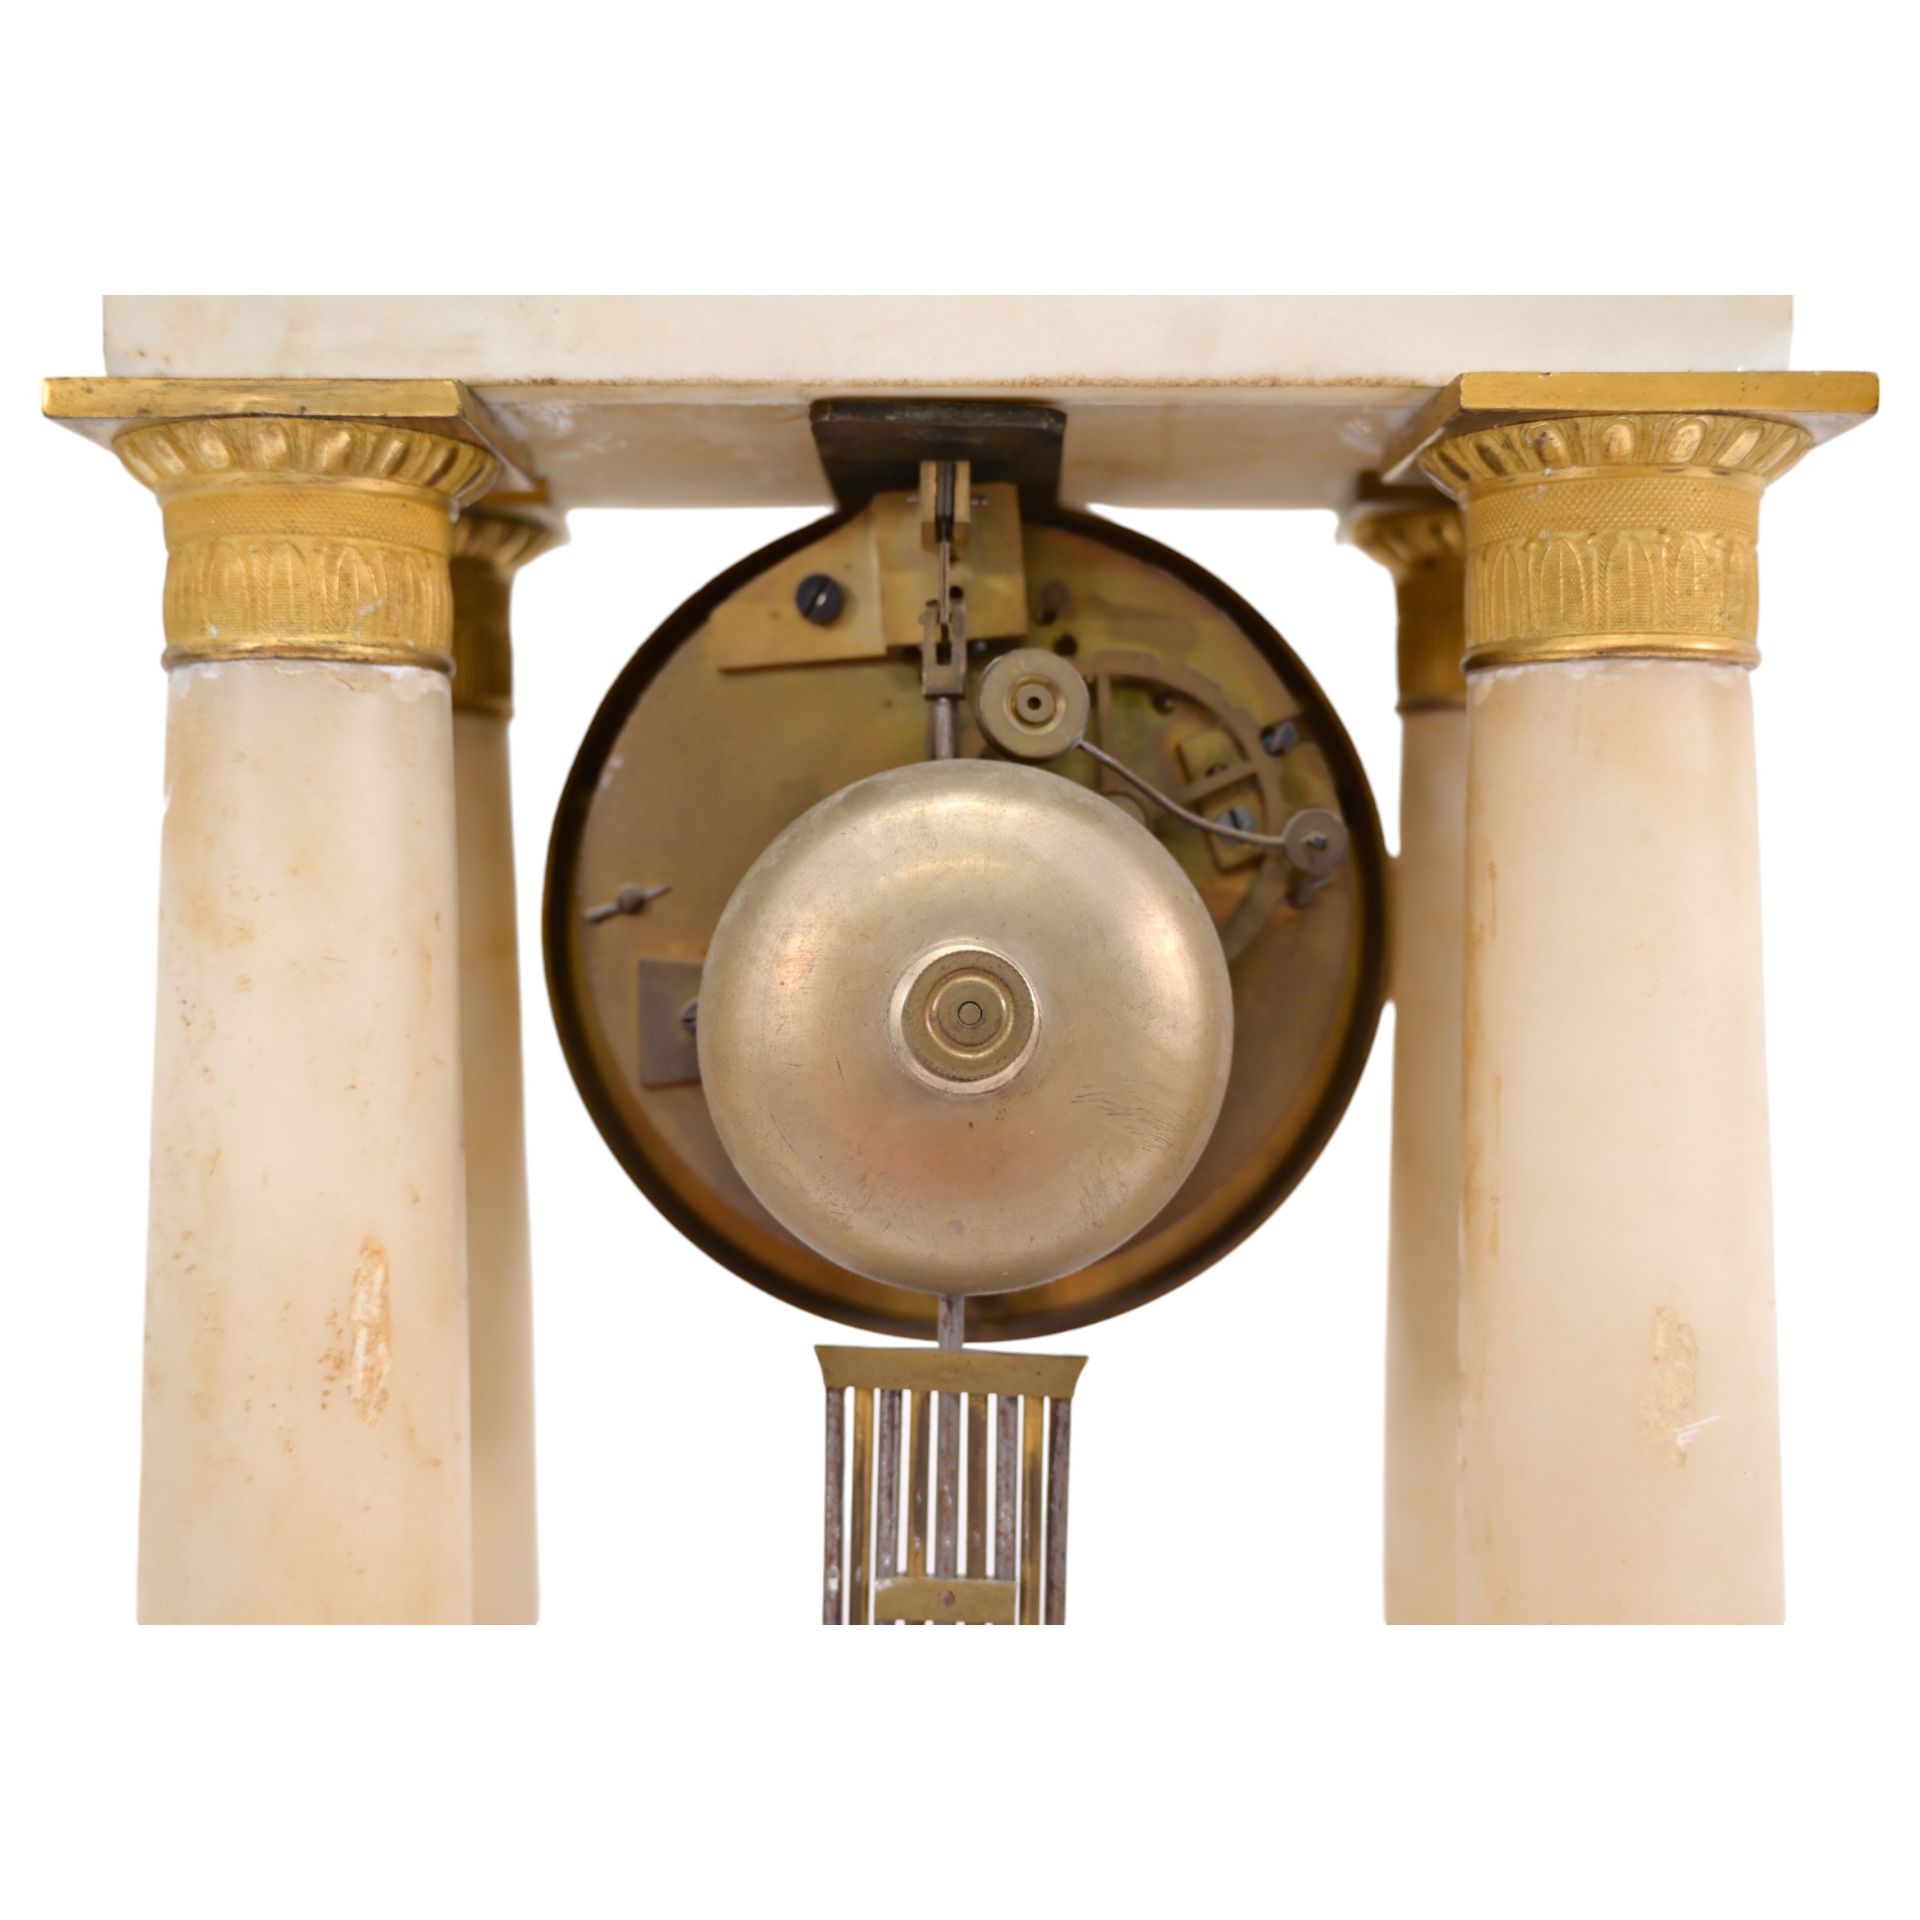 French Empire-Style Alabaster and Gilt-Bronze Portico Clock, mid 19th century. - Image 8 of 10